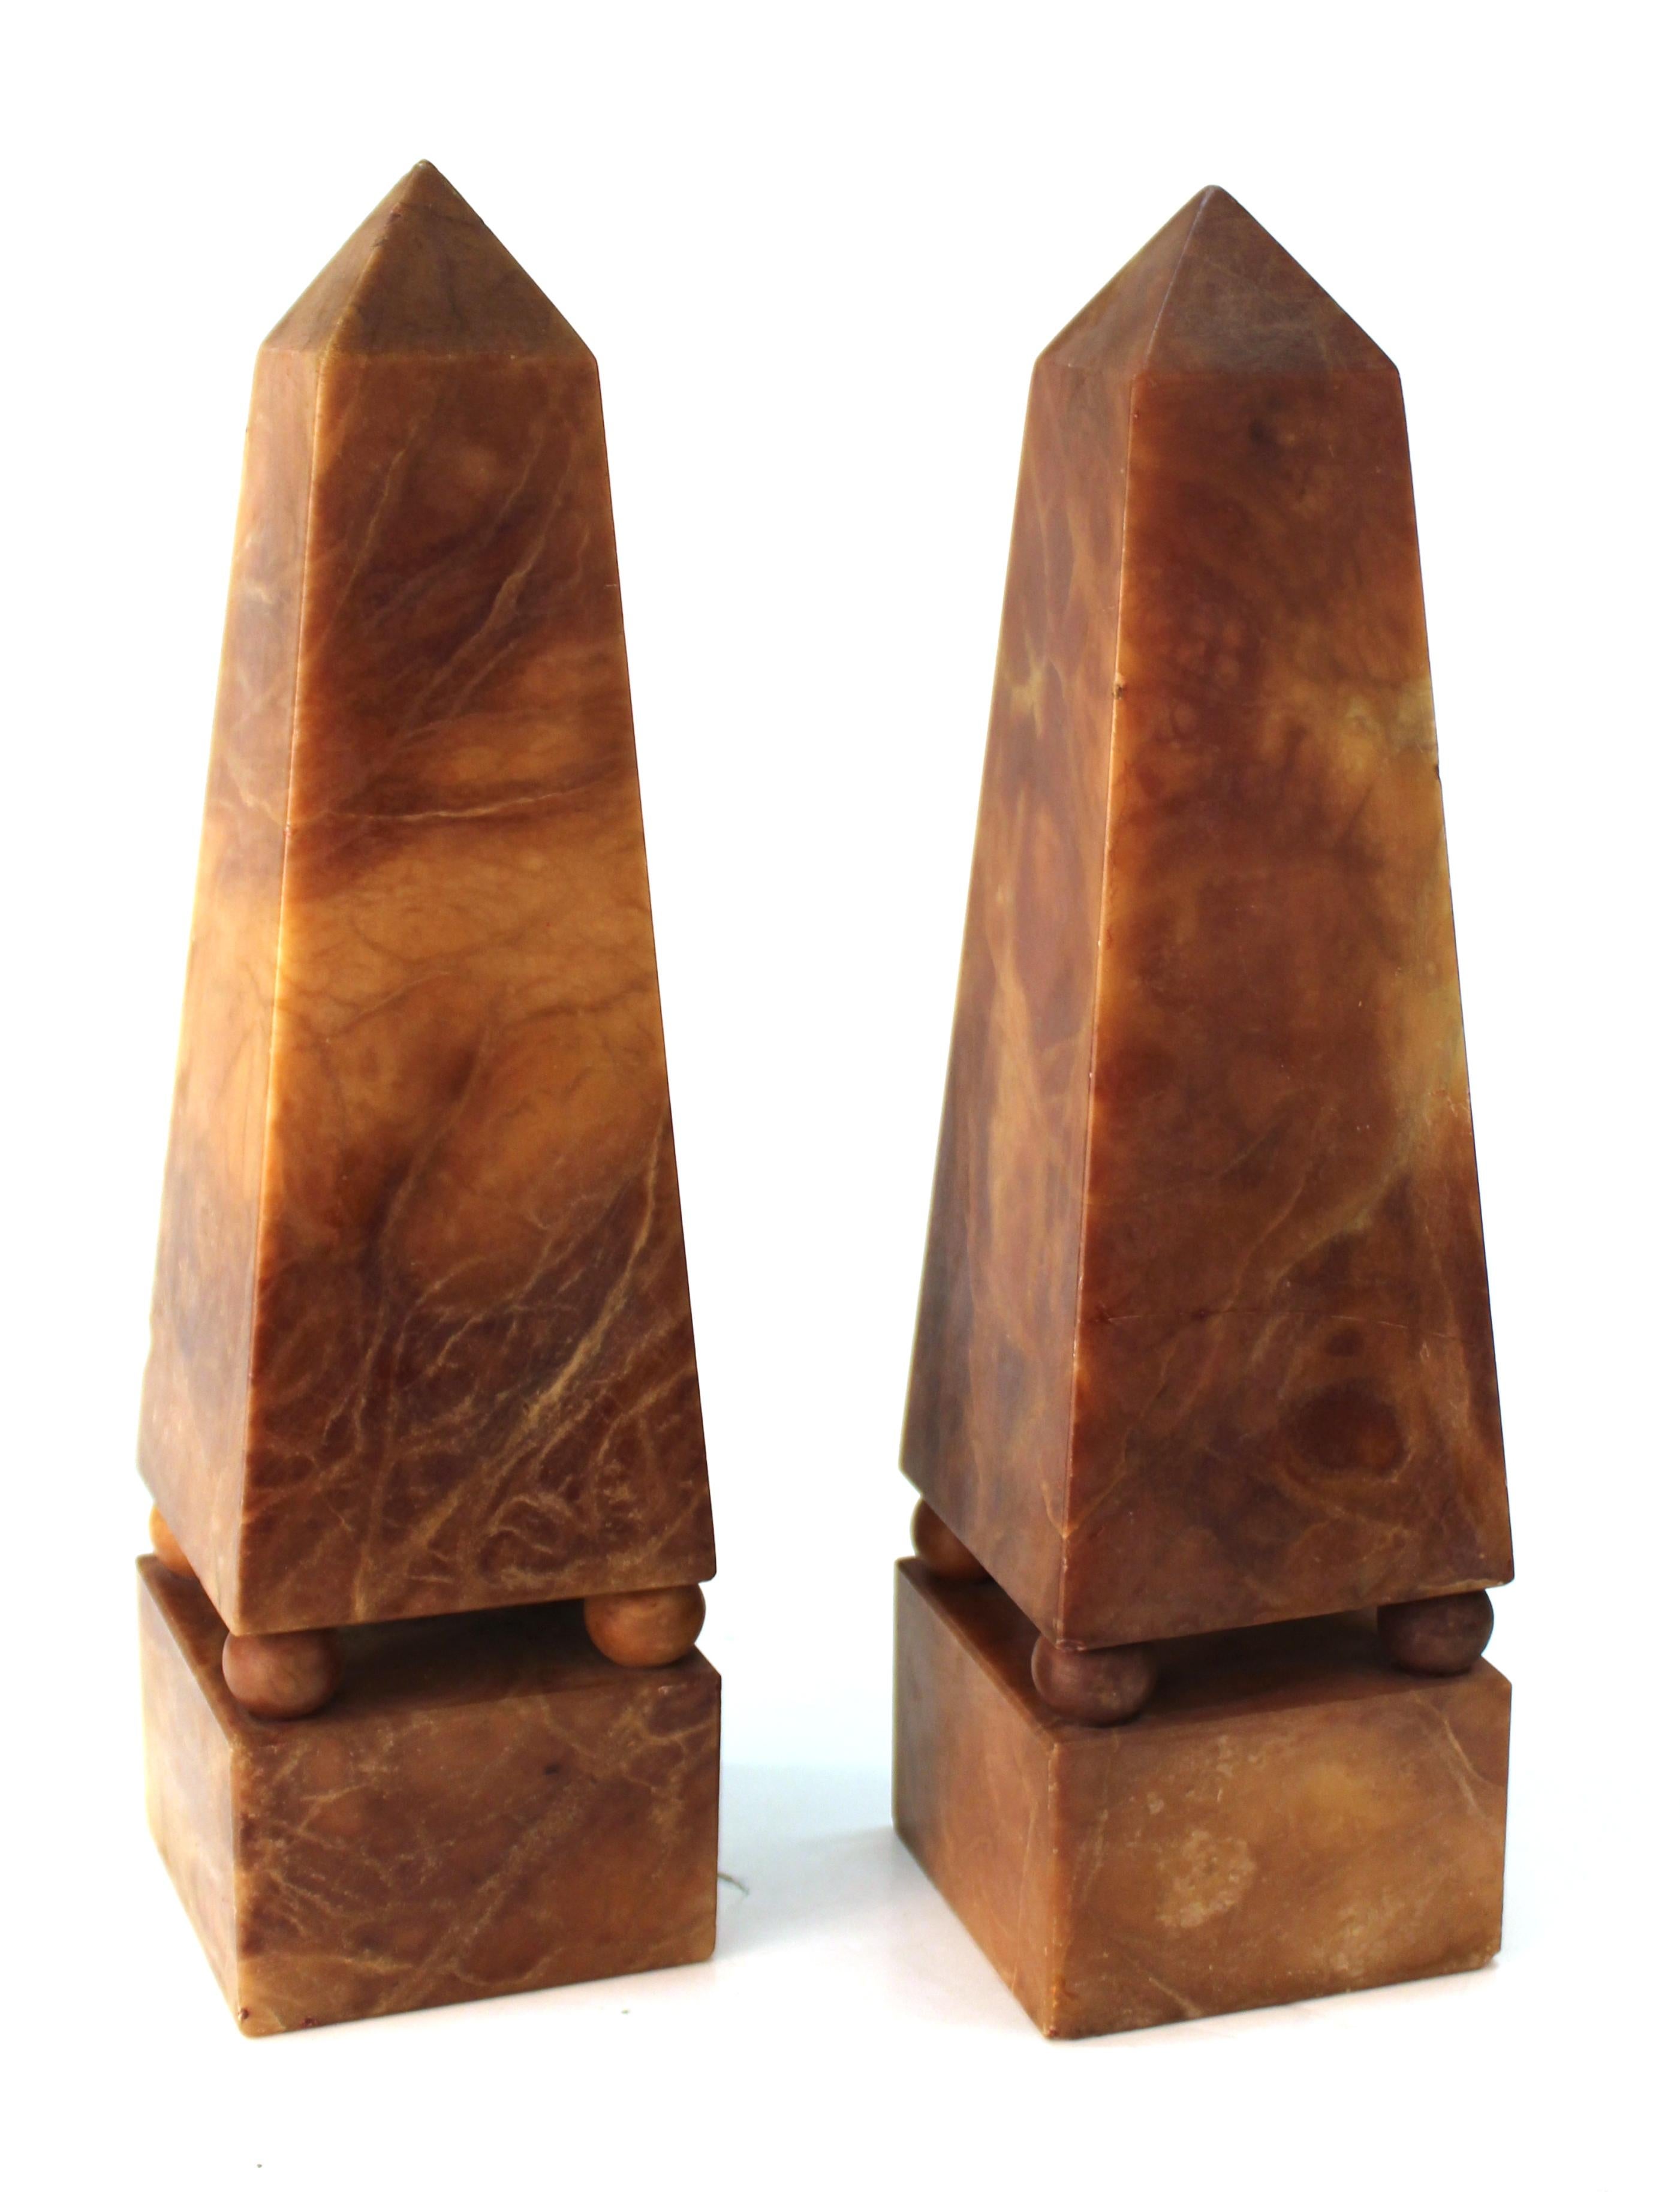 Italian 19th century pair of neoclassical style obelisks made in rare extinct brown alabaster. The pair was made in Italy and is in great condition, with some age-appropriate wear and minor chip to the top of one of the obelisks.